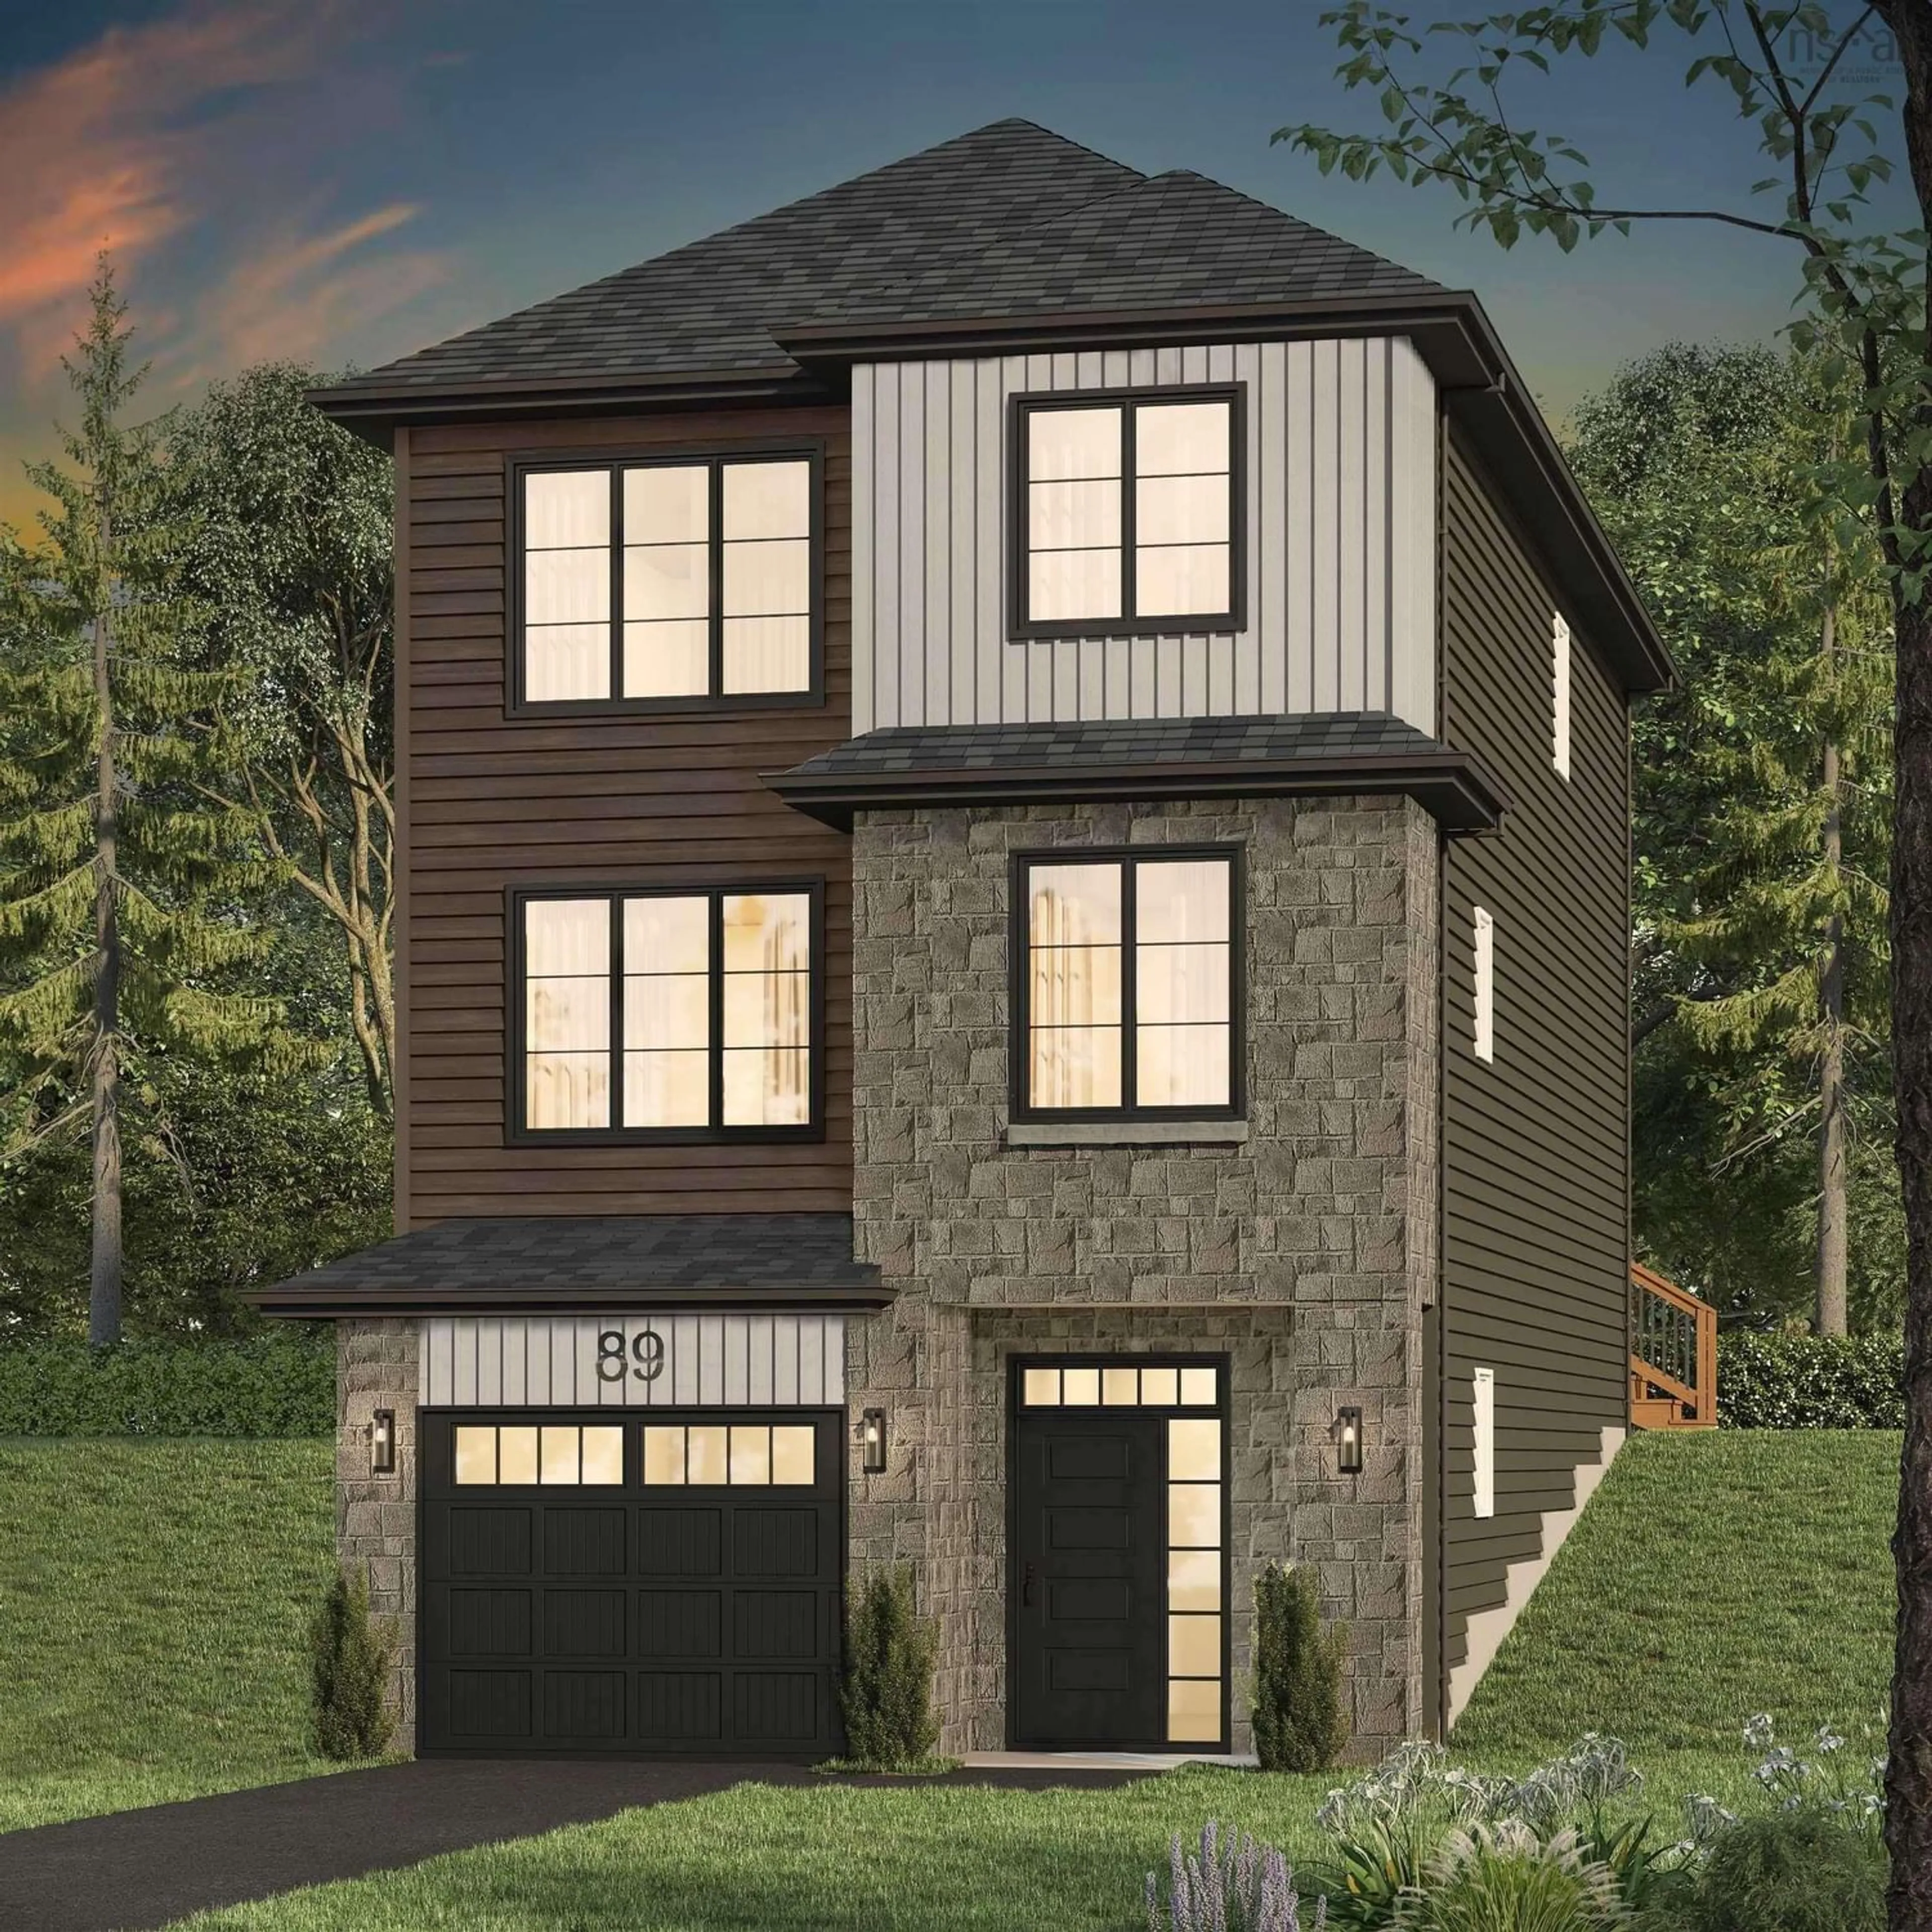 Home with stone exterior material for 17 Duff Crt #DUF21, Bedford West Nova Scotia B4B 2P2